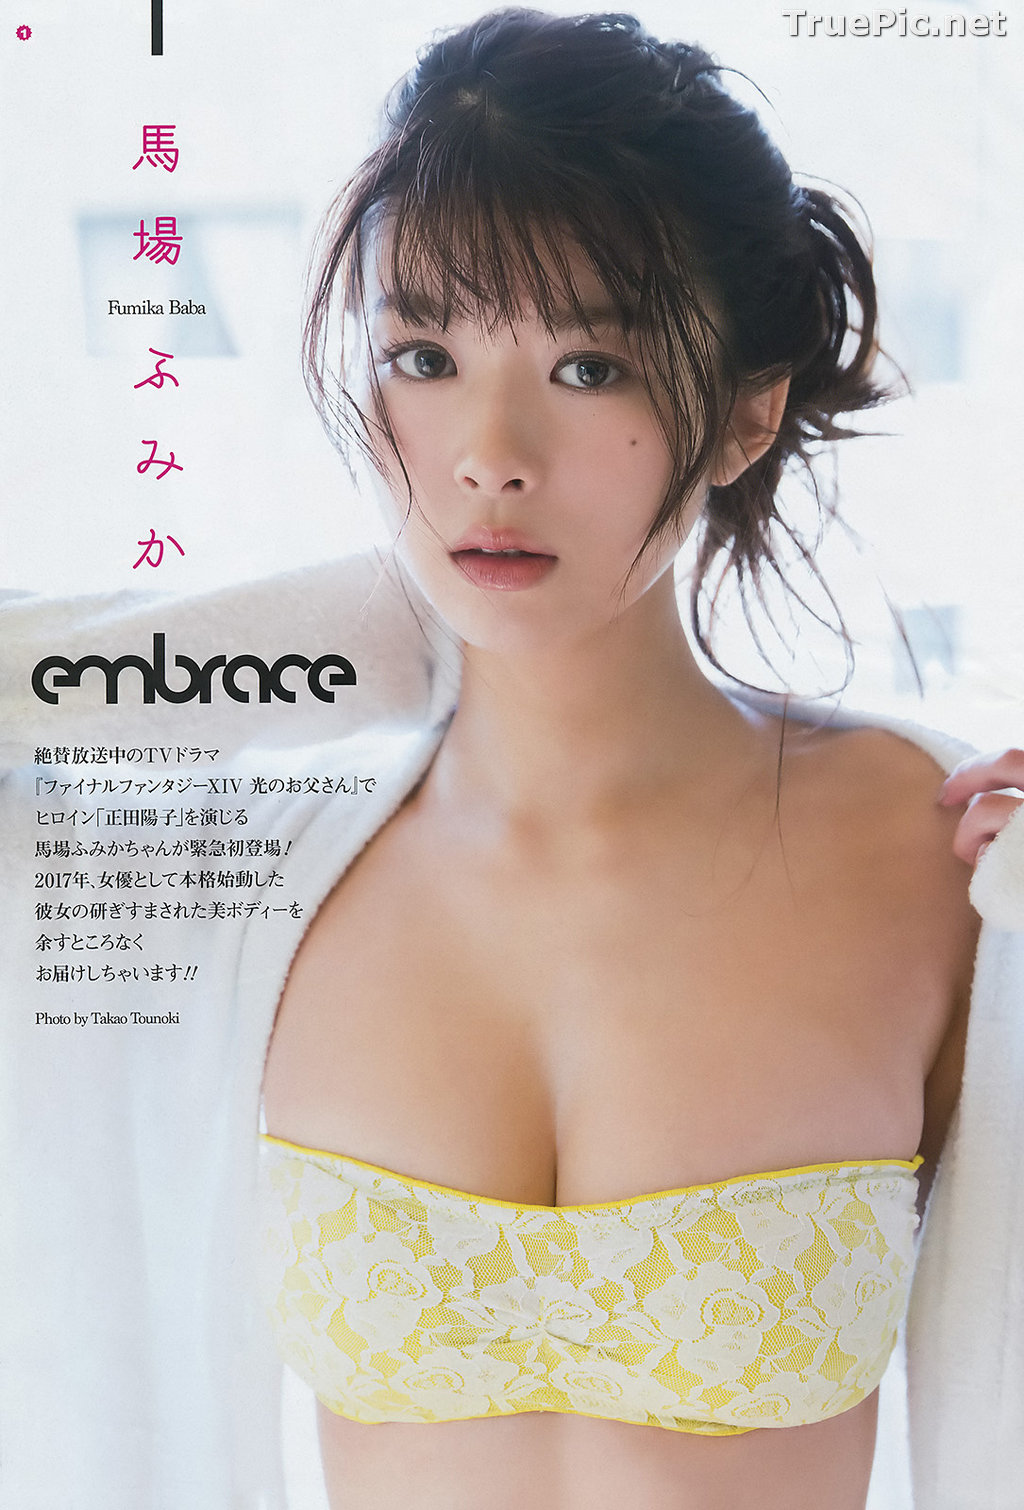 Image Japanese Actress and Model - Baba Fumika - Sexy Picture Collection - TruePic.net - Picture-104